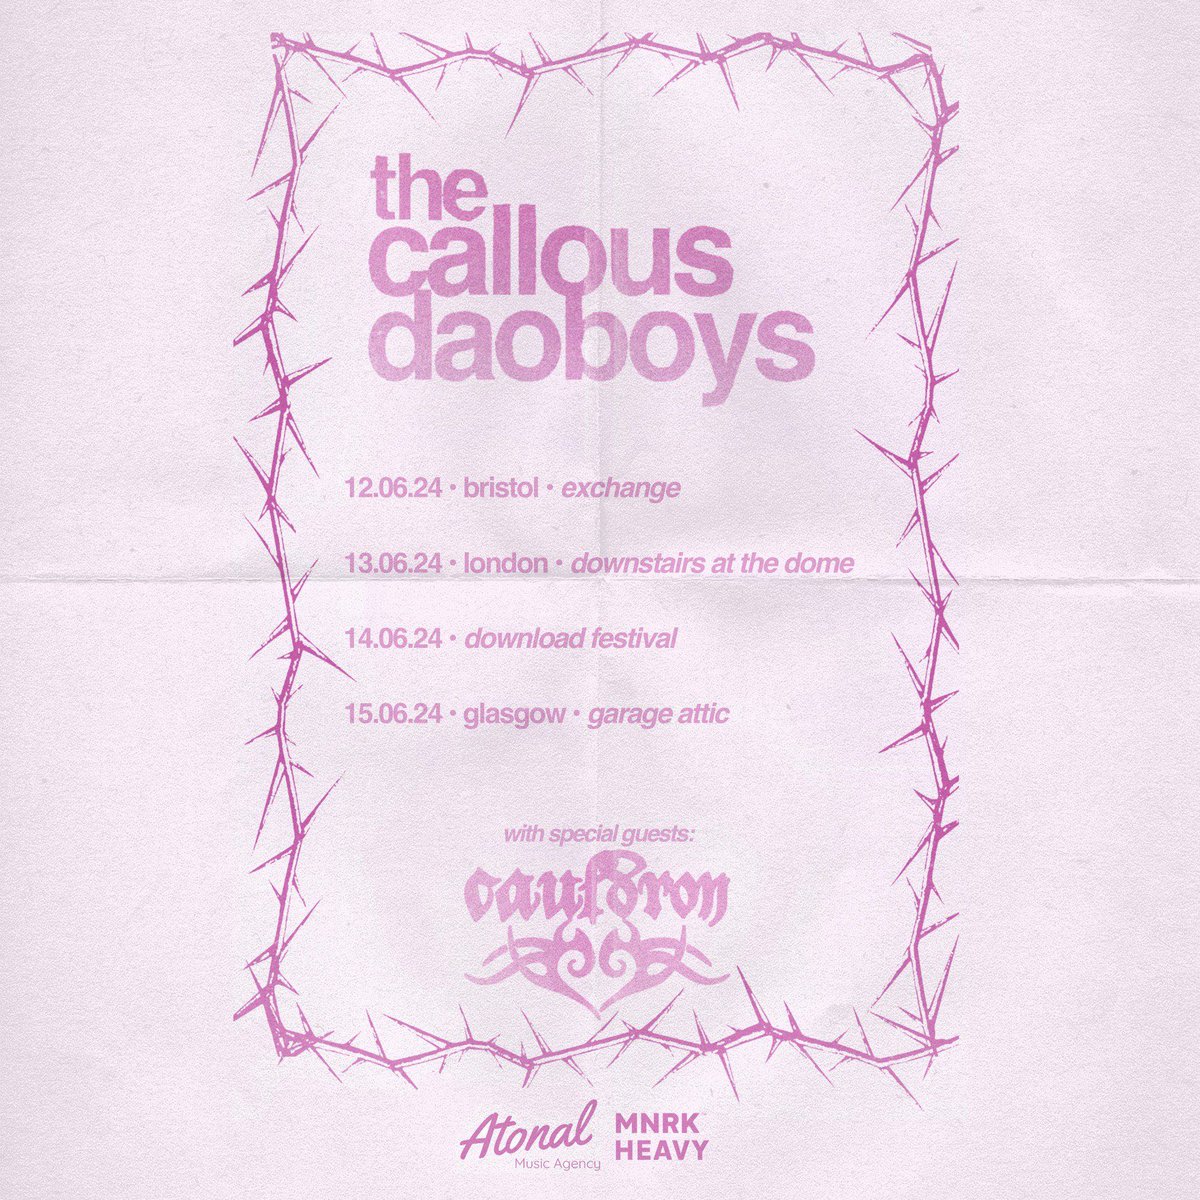 Excited to announce that we’ll be joining @callousdaoboys on their UK dates around Download Festival this June. Tickets available Friday 1st March for all dates. 📸 by @joestevenhart